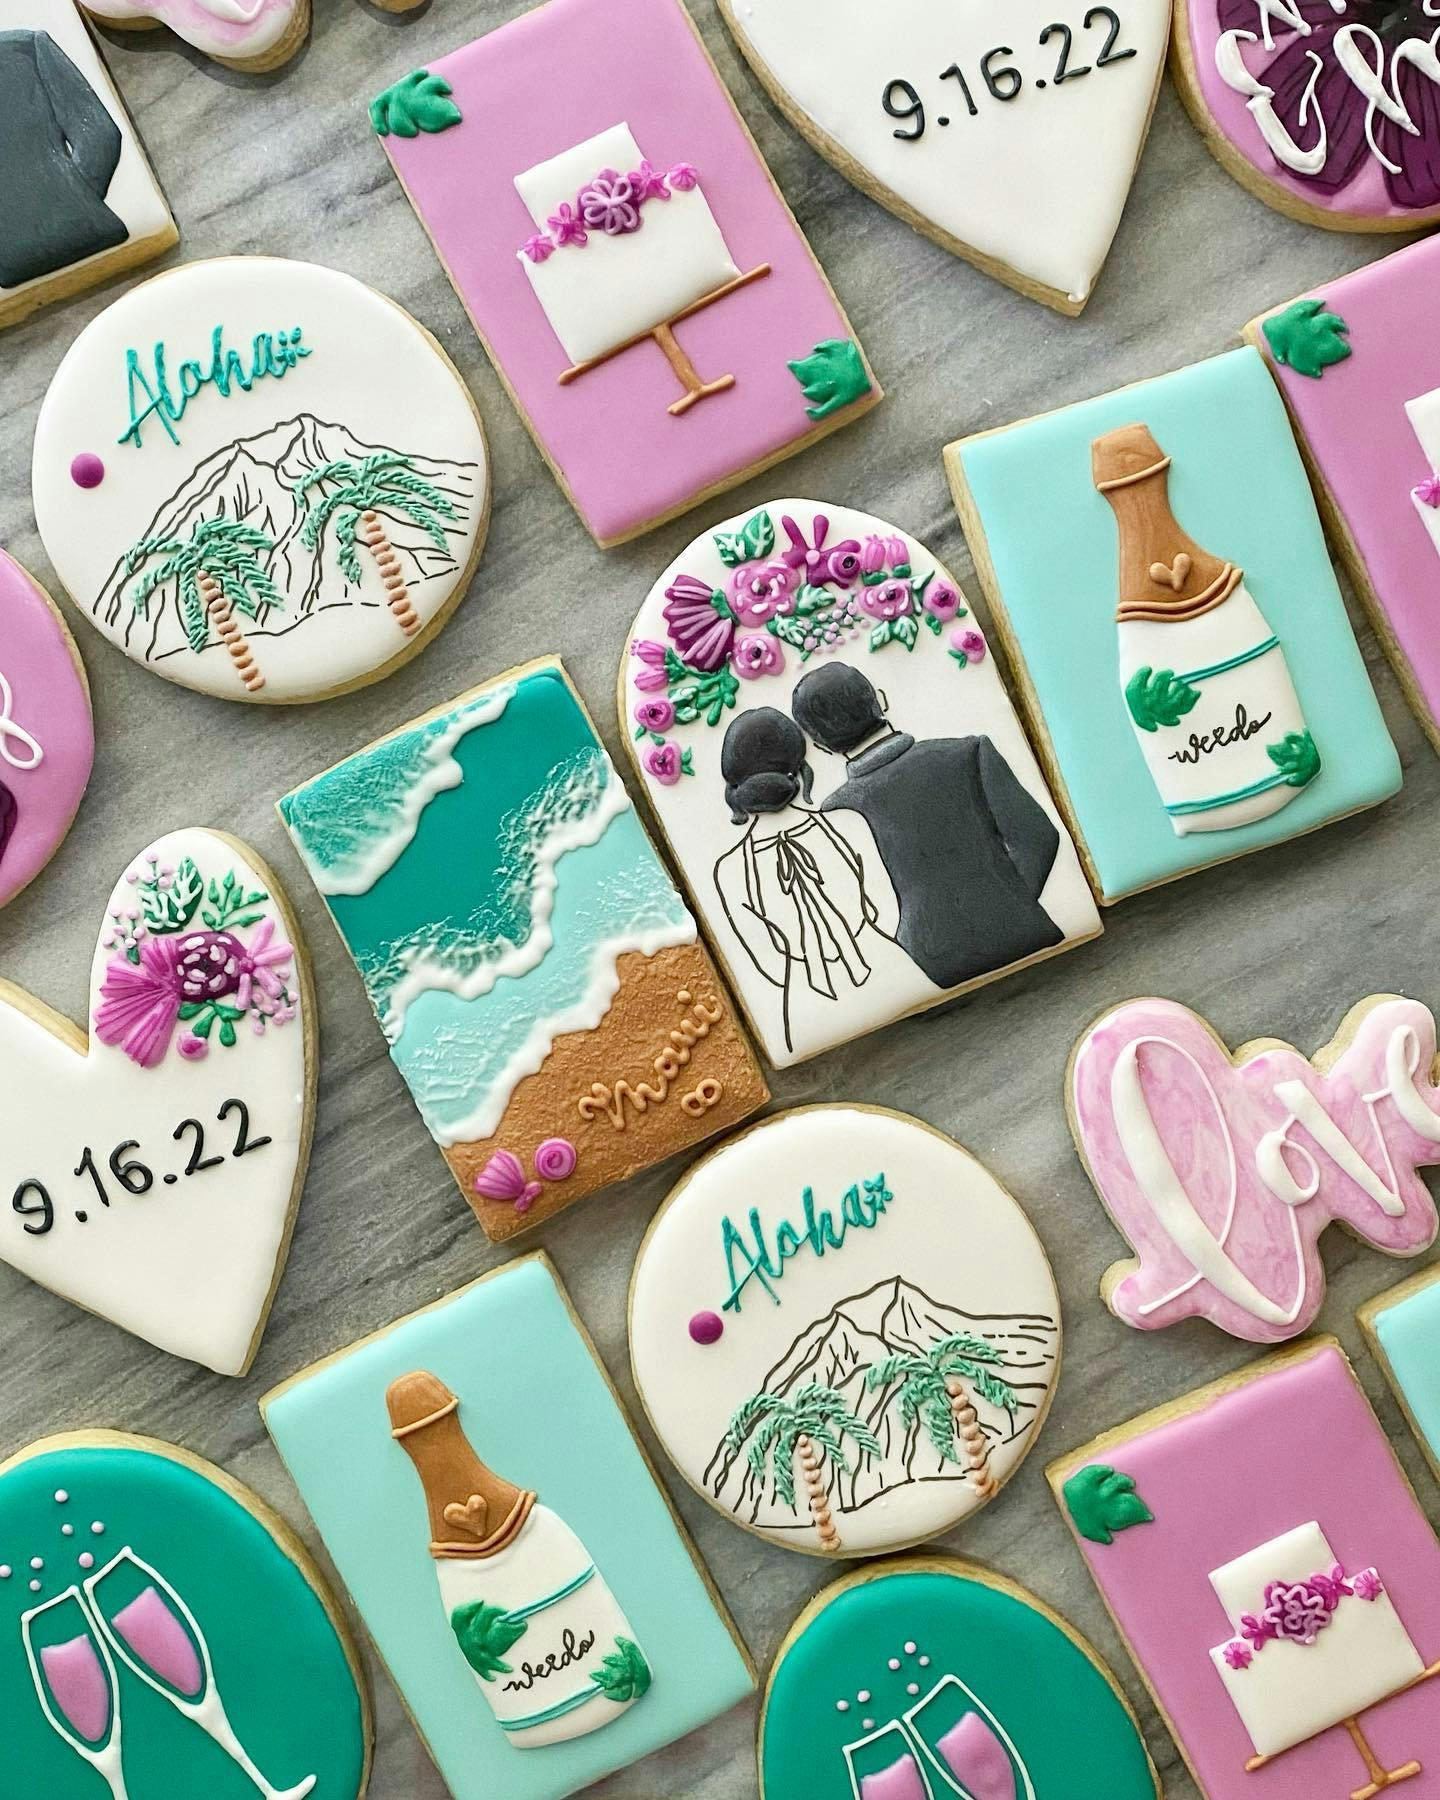 Now that the event has passed, it’s safe to post these wedding cookies made for a destination wedding! 🏝️

📦 While I don’t offer shipping, I can provide shipping materials and packaging to keep your cookies extra safe if you ship or travel with them, just let me know!

✈️ These cookies were wrapped in lots bubble wrap and rode with the customer on the long plane trip to Hawaii 
.
.
.
.
.
#dmvfoodie #northernvirginia #northernva #alexandriava #annandaleva #arlingtonva #novafoodies #shopsmall #novacookies #cookiedecorating #customcookies #decoratedcookies #sugarcookies #royalicing #cookieartist #designercookies #decoratedsugarcookies #hawaiiwedding #weddingcookies #herecomesthebride #destinationwedding